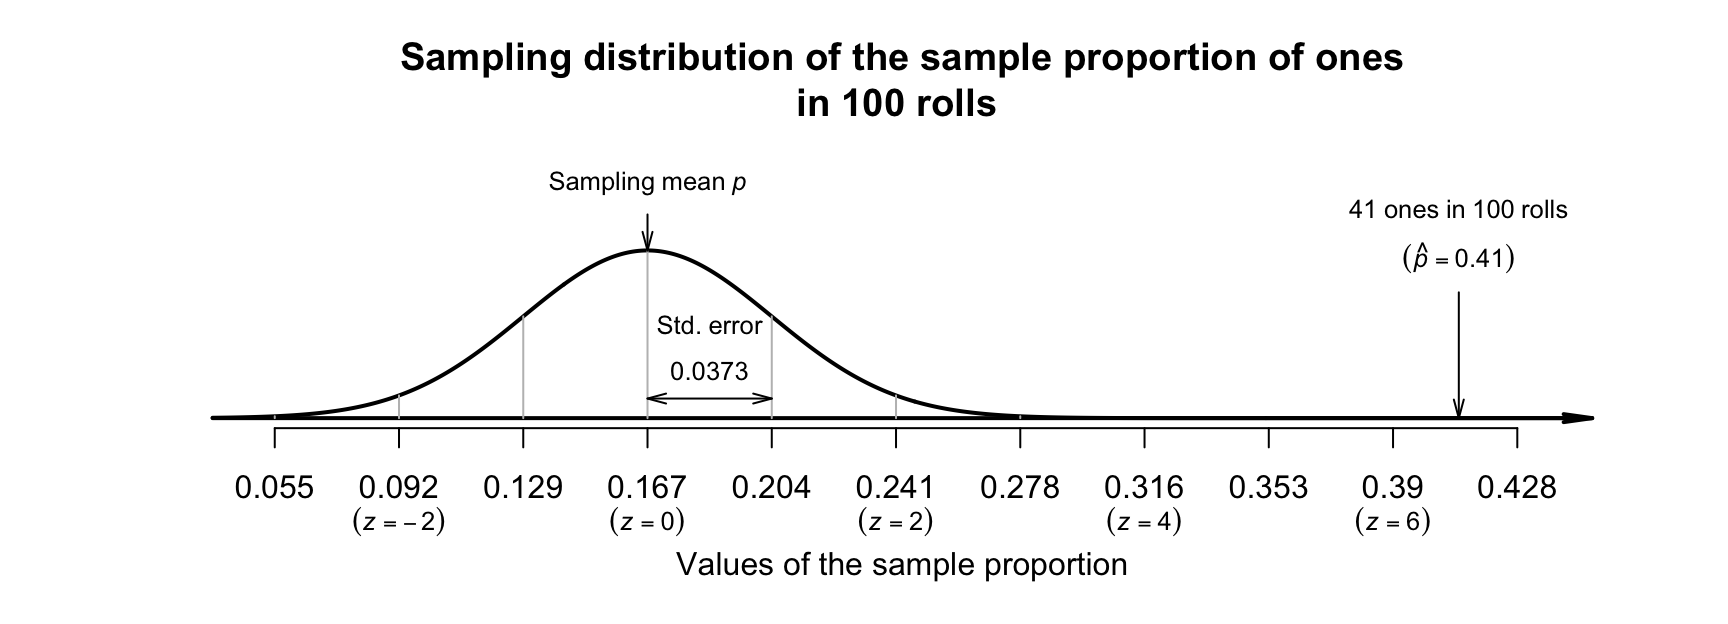 The sampling distribution, showing the distribution of the sample proportion of ones when the population proportion is $1/6$, in $50$ die rolls